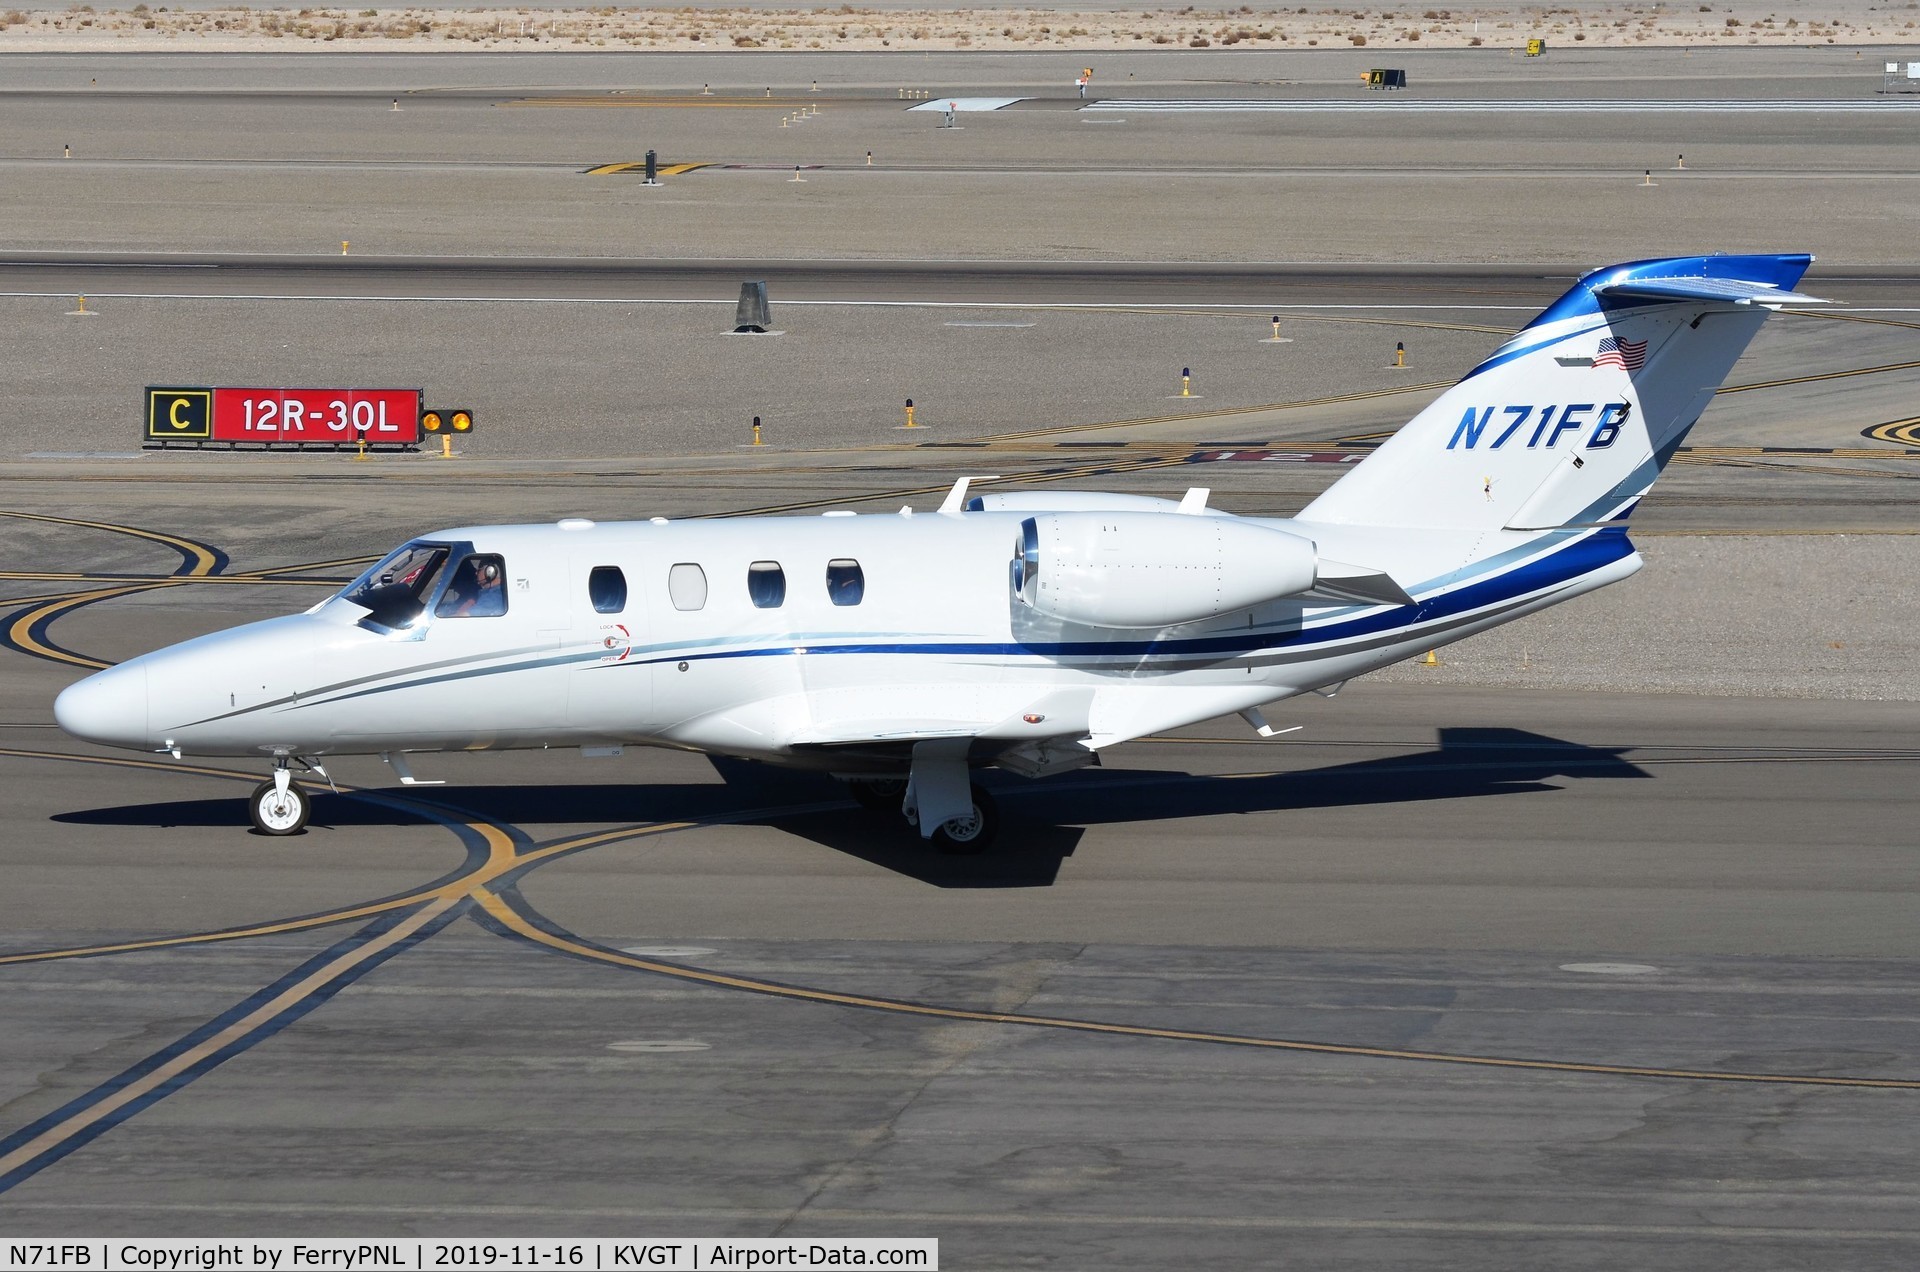 N71FB, 2013 Cessna 525 Citation M2 C/N 525-0812, Ce525M2 taxying for departure